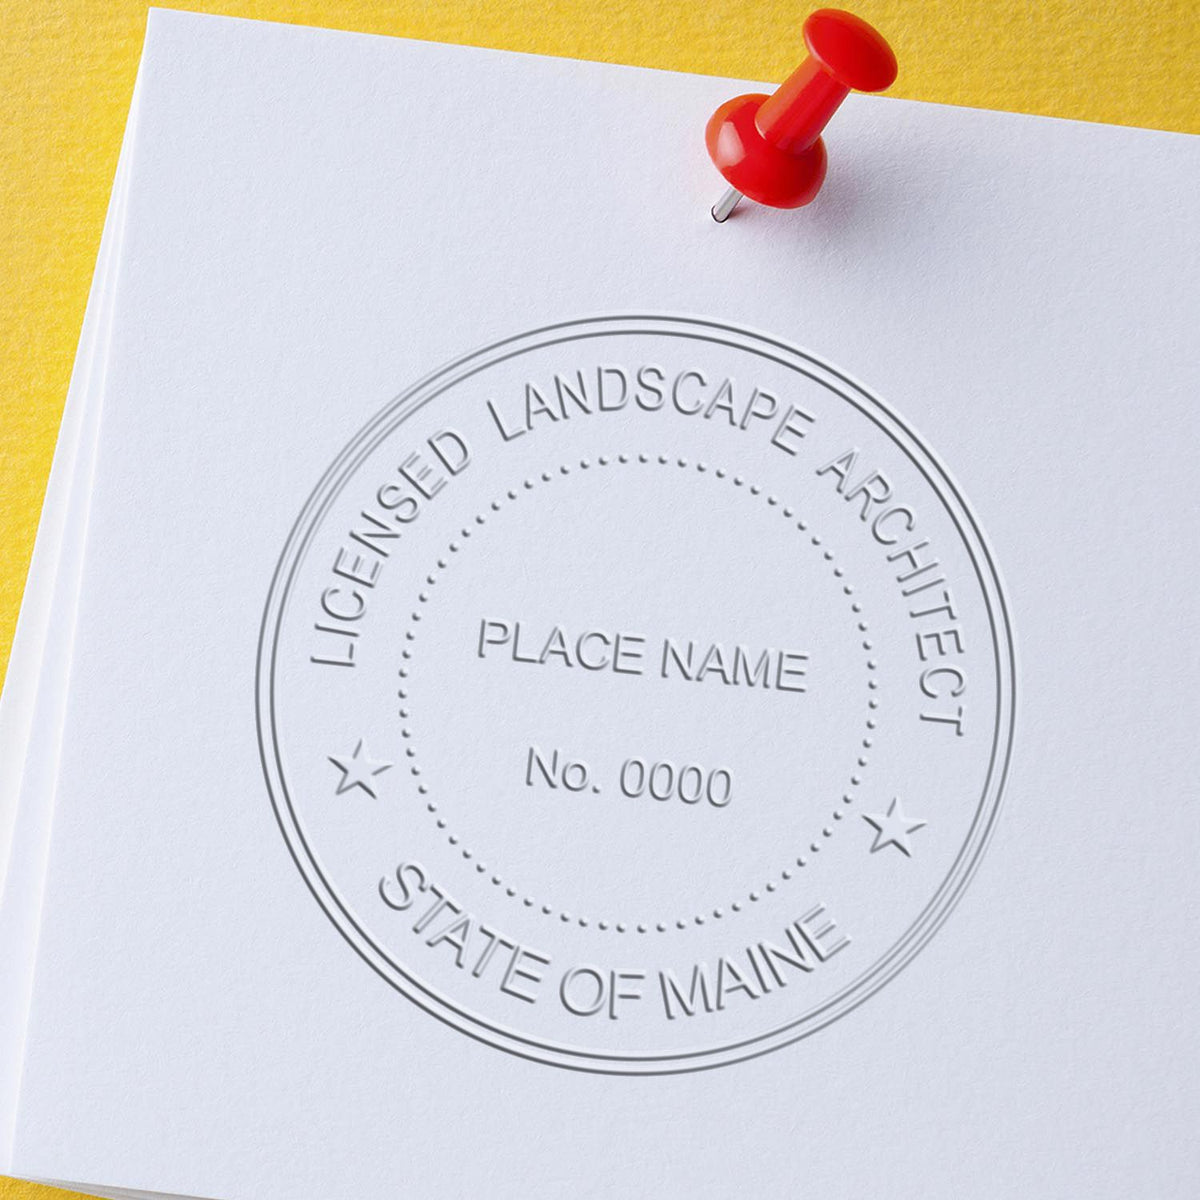 A stamped imprint of the Gift Maine Landscape Architect Seal in this stylish lifestyle photo, setting the tone for a unique and personalized product.